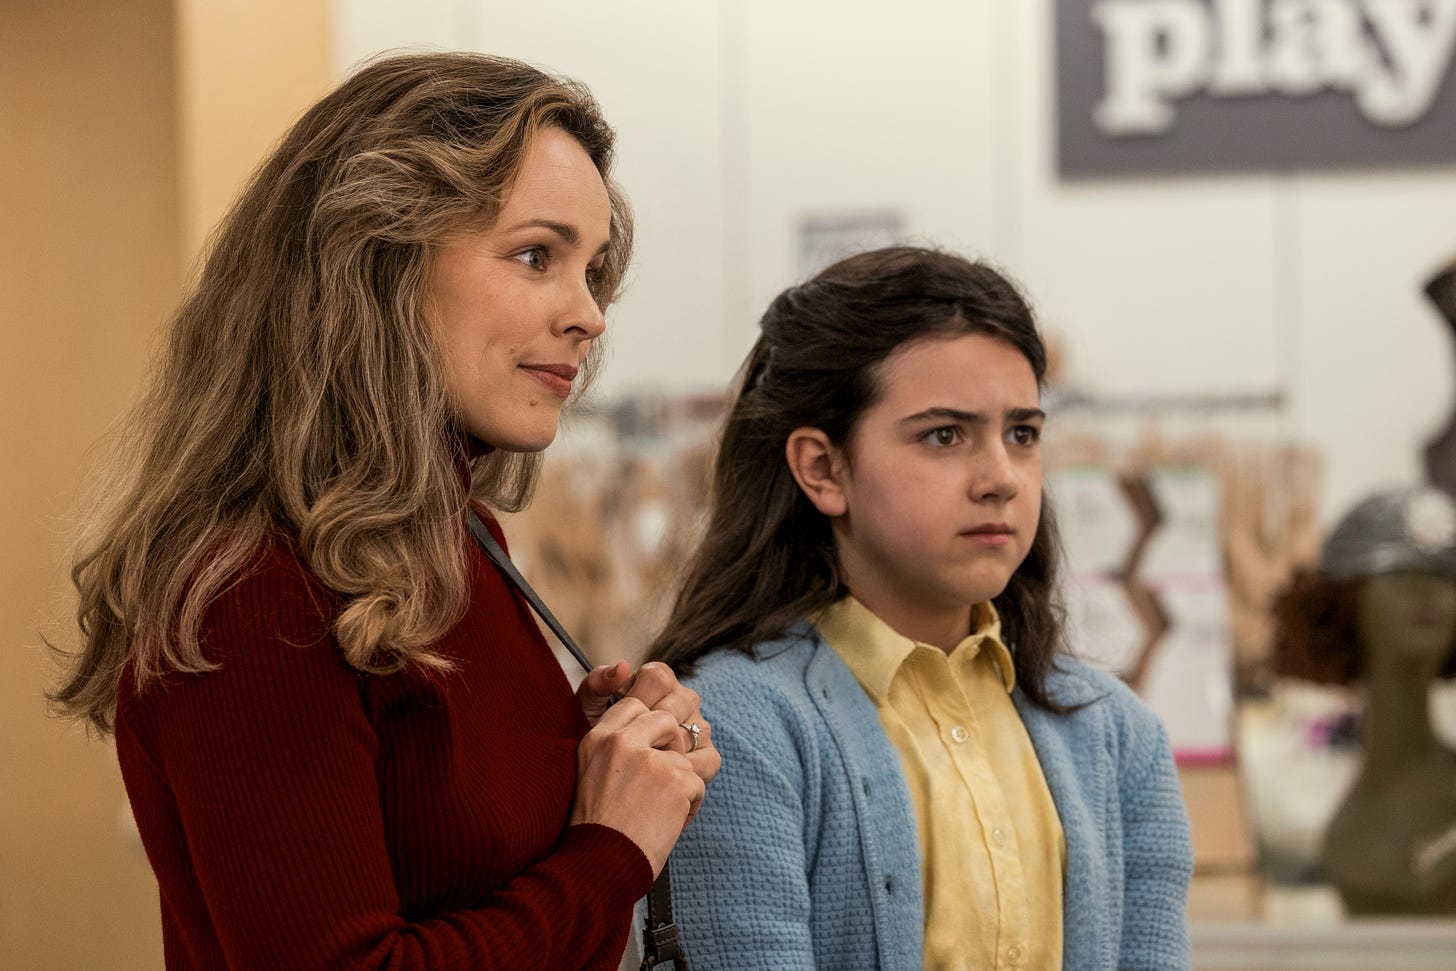 Rachel McAdams as Barbara (left) and Abby Ryder Fortson as Margaret (right) in ARE YOU THERE GOD? IT'S ME, MARGARET.